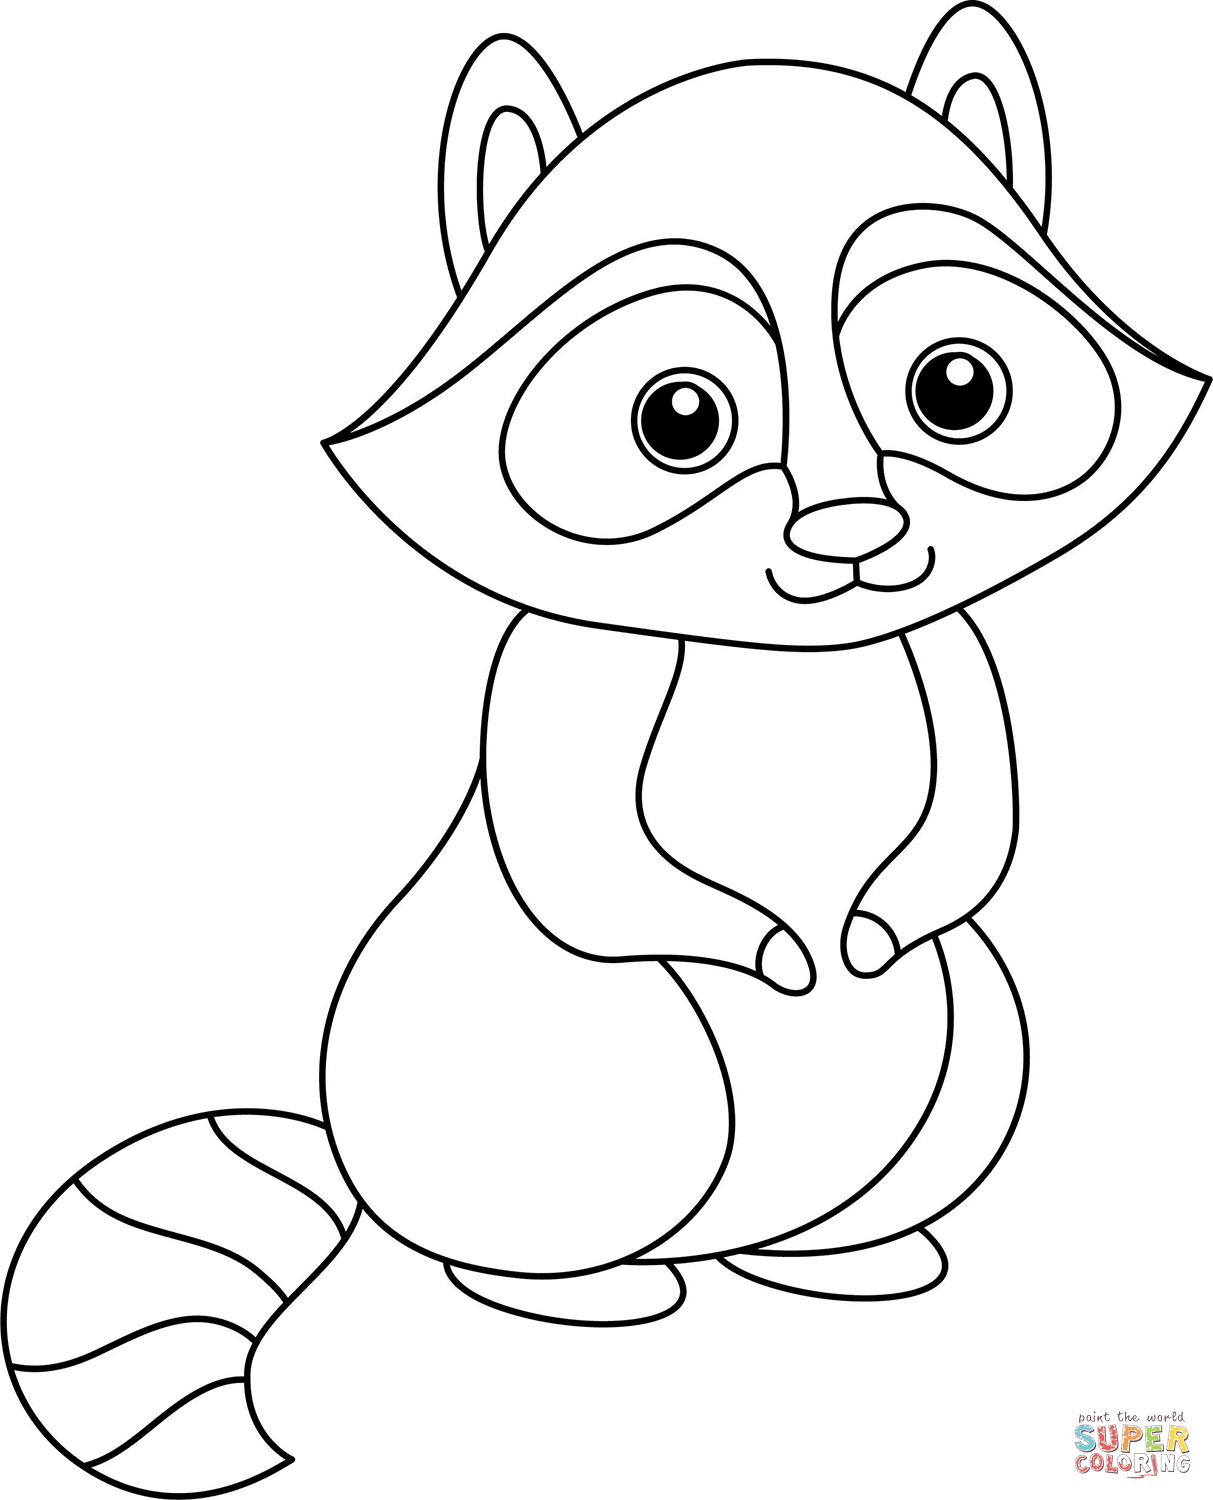 Cute raccoon coloring page free printable coloring pages